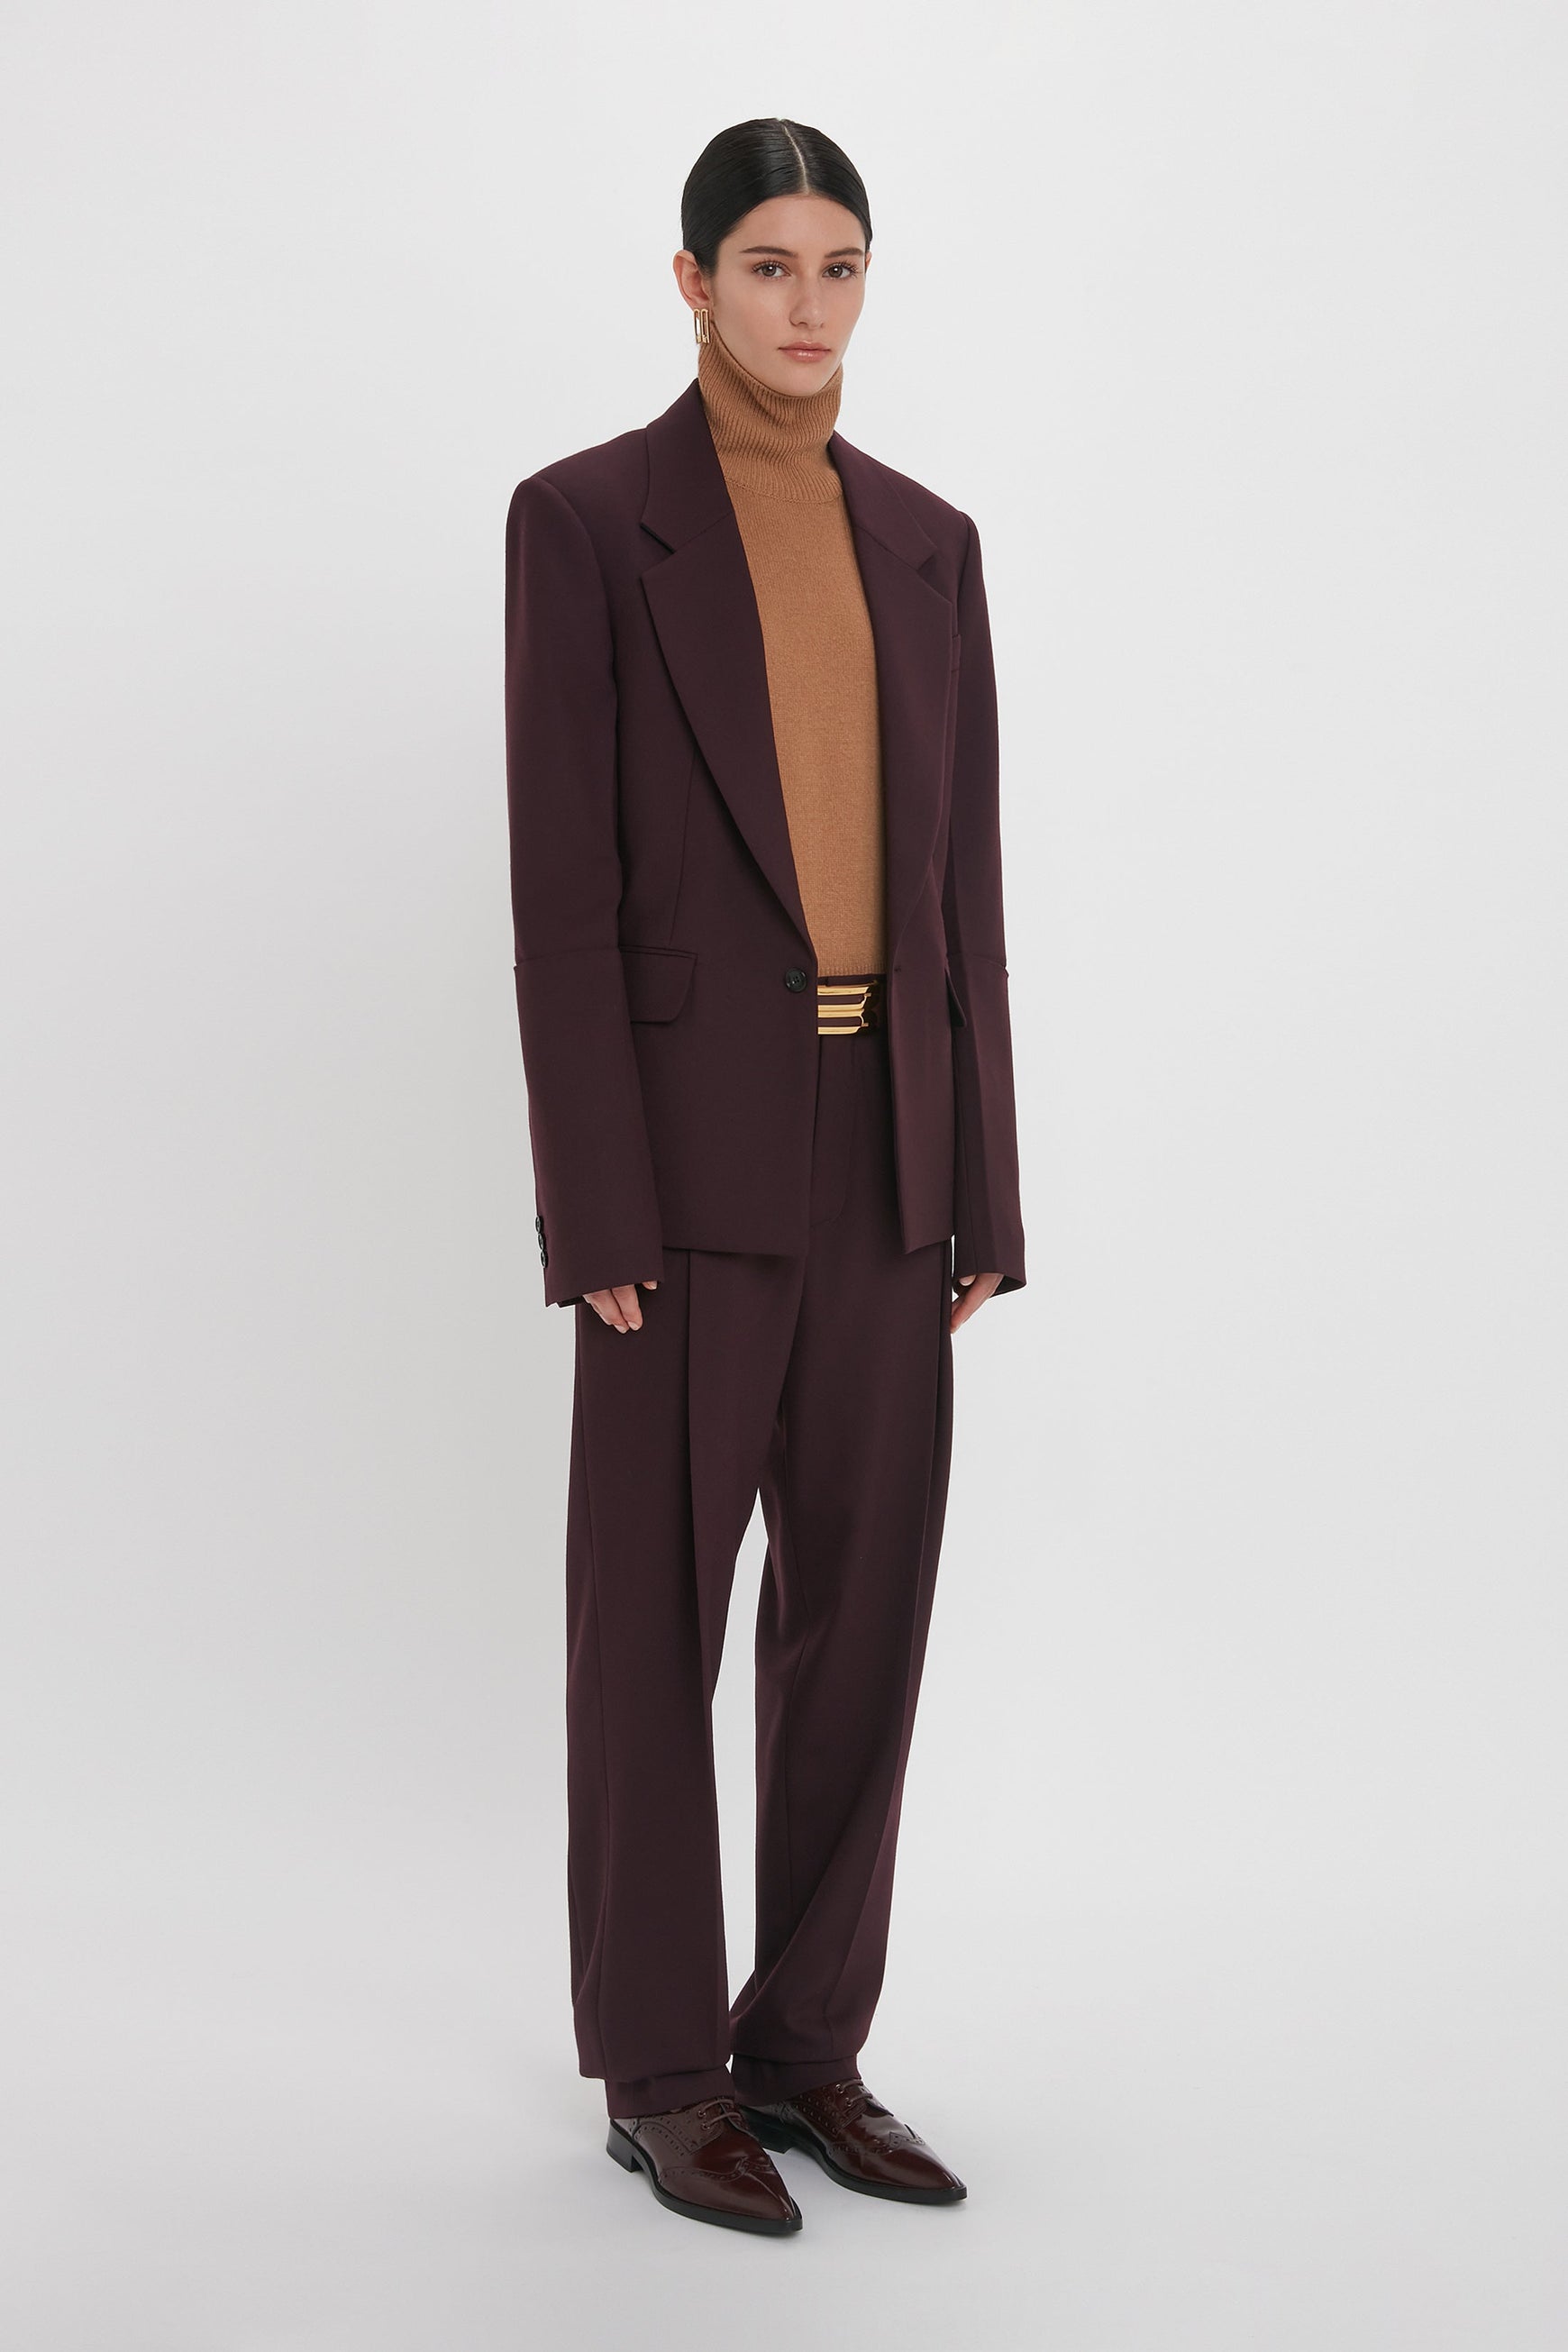 Person wearing a Victoria Beckham Sleeve Detail Patch Pocket Jacket In Deep Mahogany with matching trousers, a tan turtleneck sweater, and dark brown shoes, standing against a plain white background.